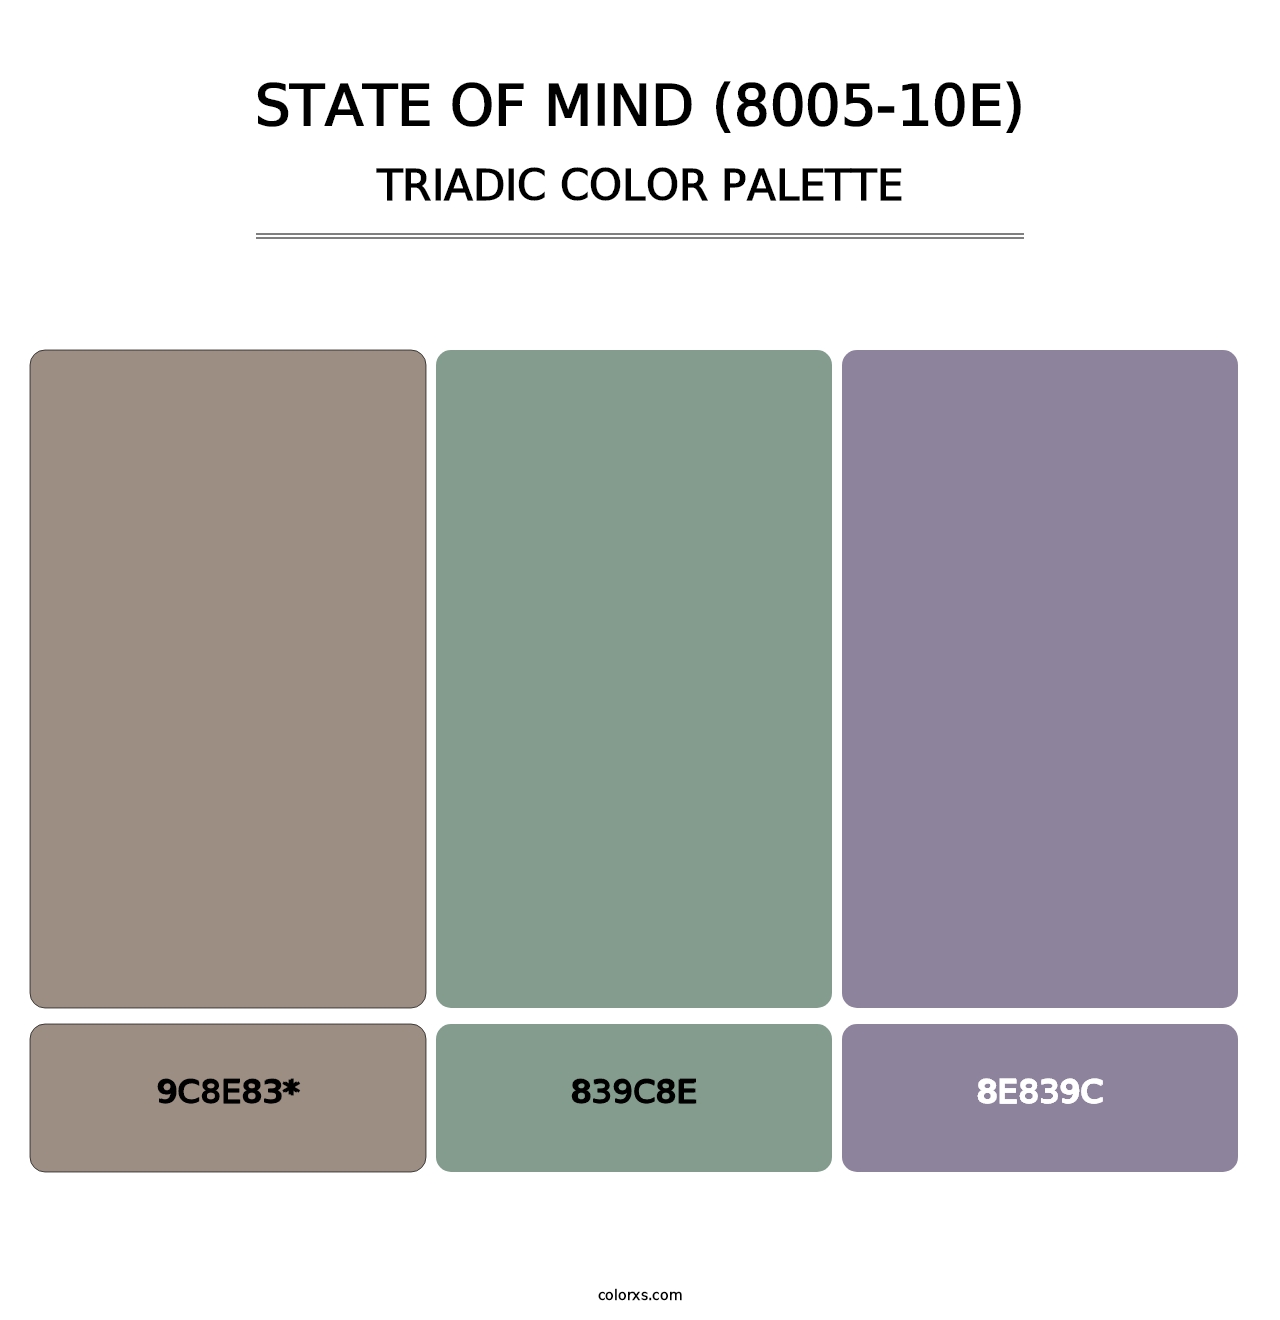 State of Mind (8005-10E) - Triadic Color Palette